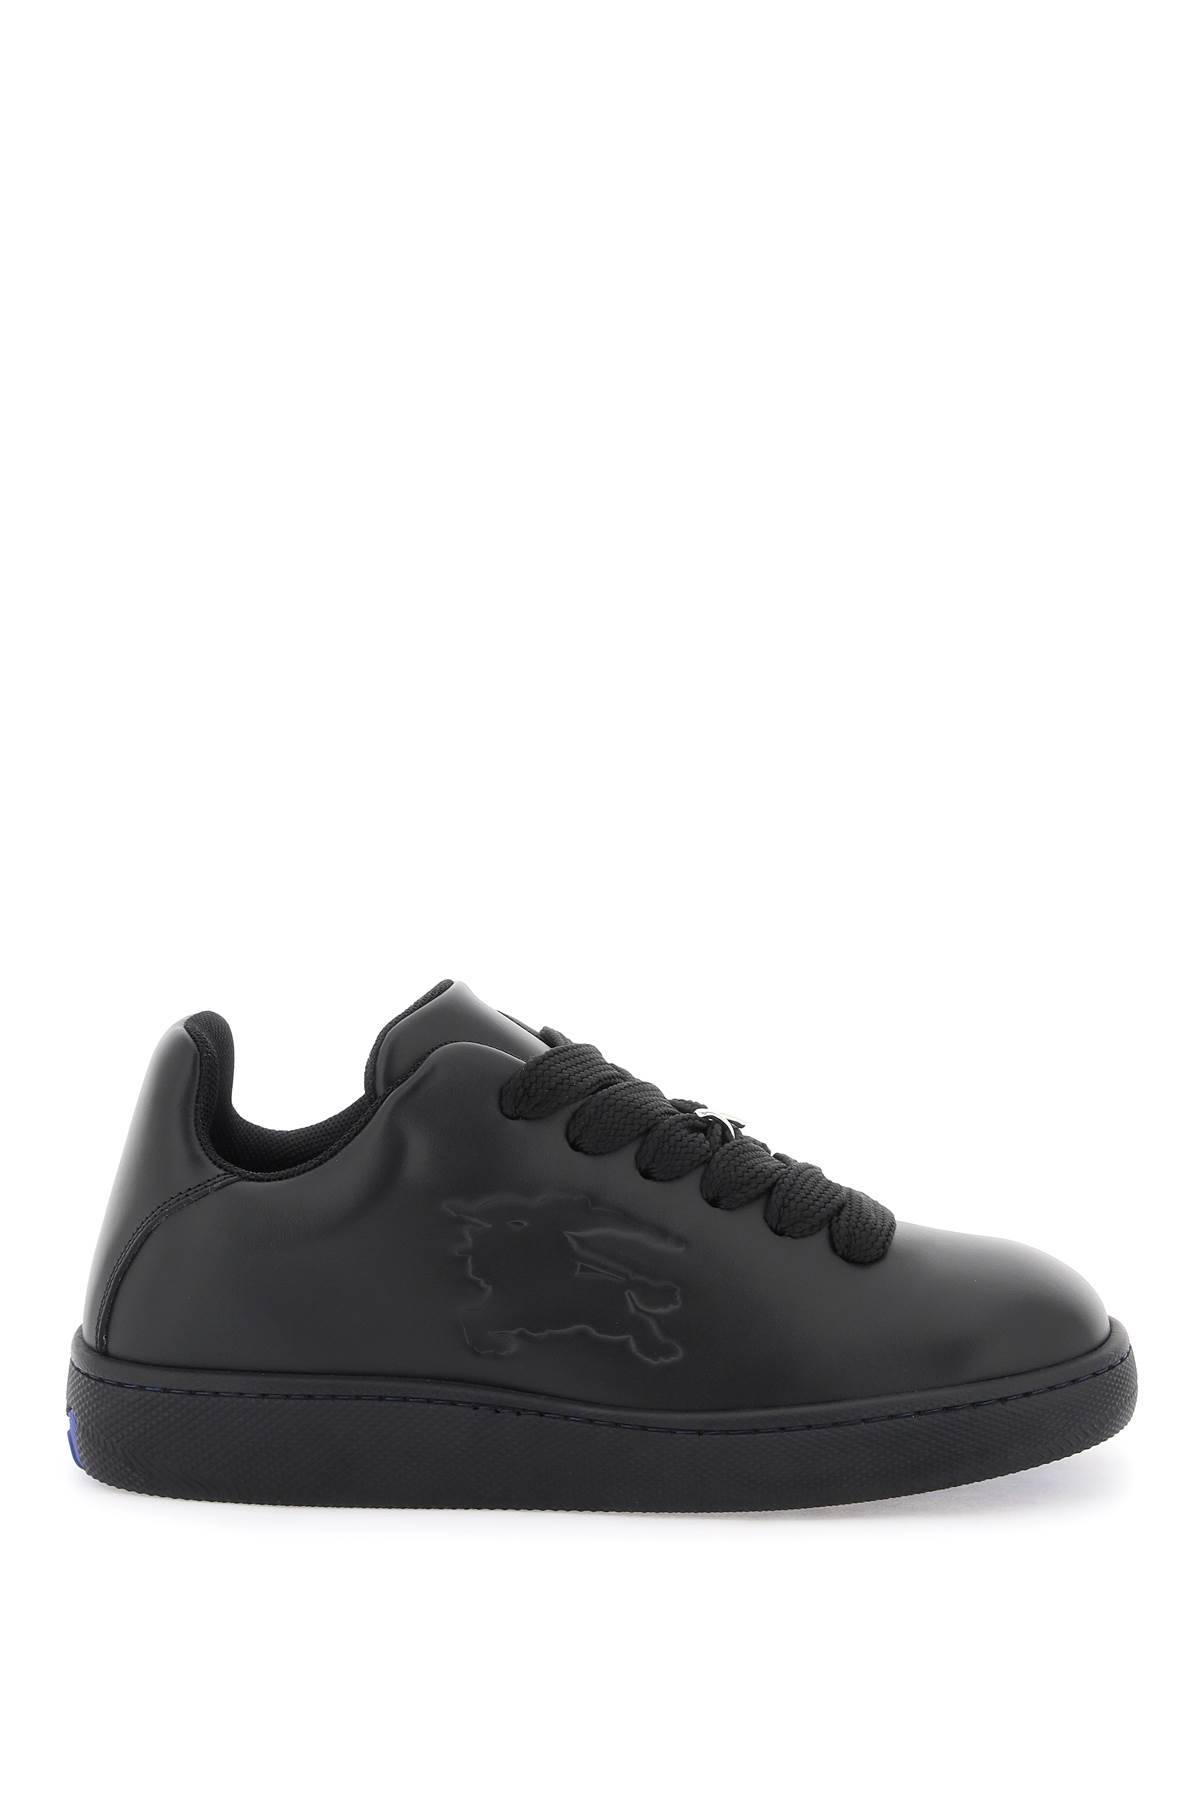 Shop Burberry Leather Sneaker Storage Box In Black